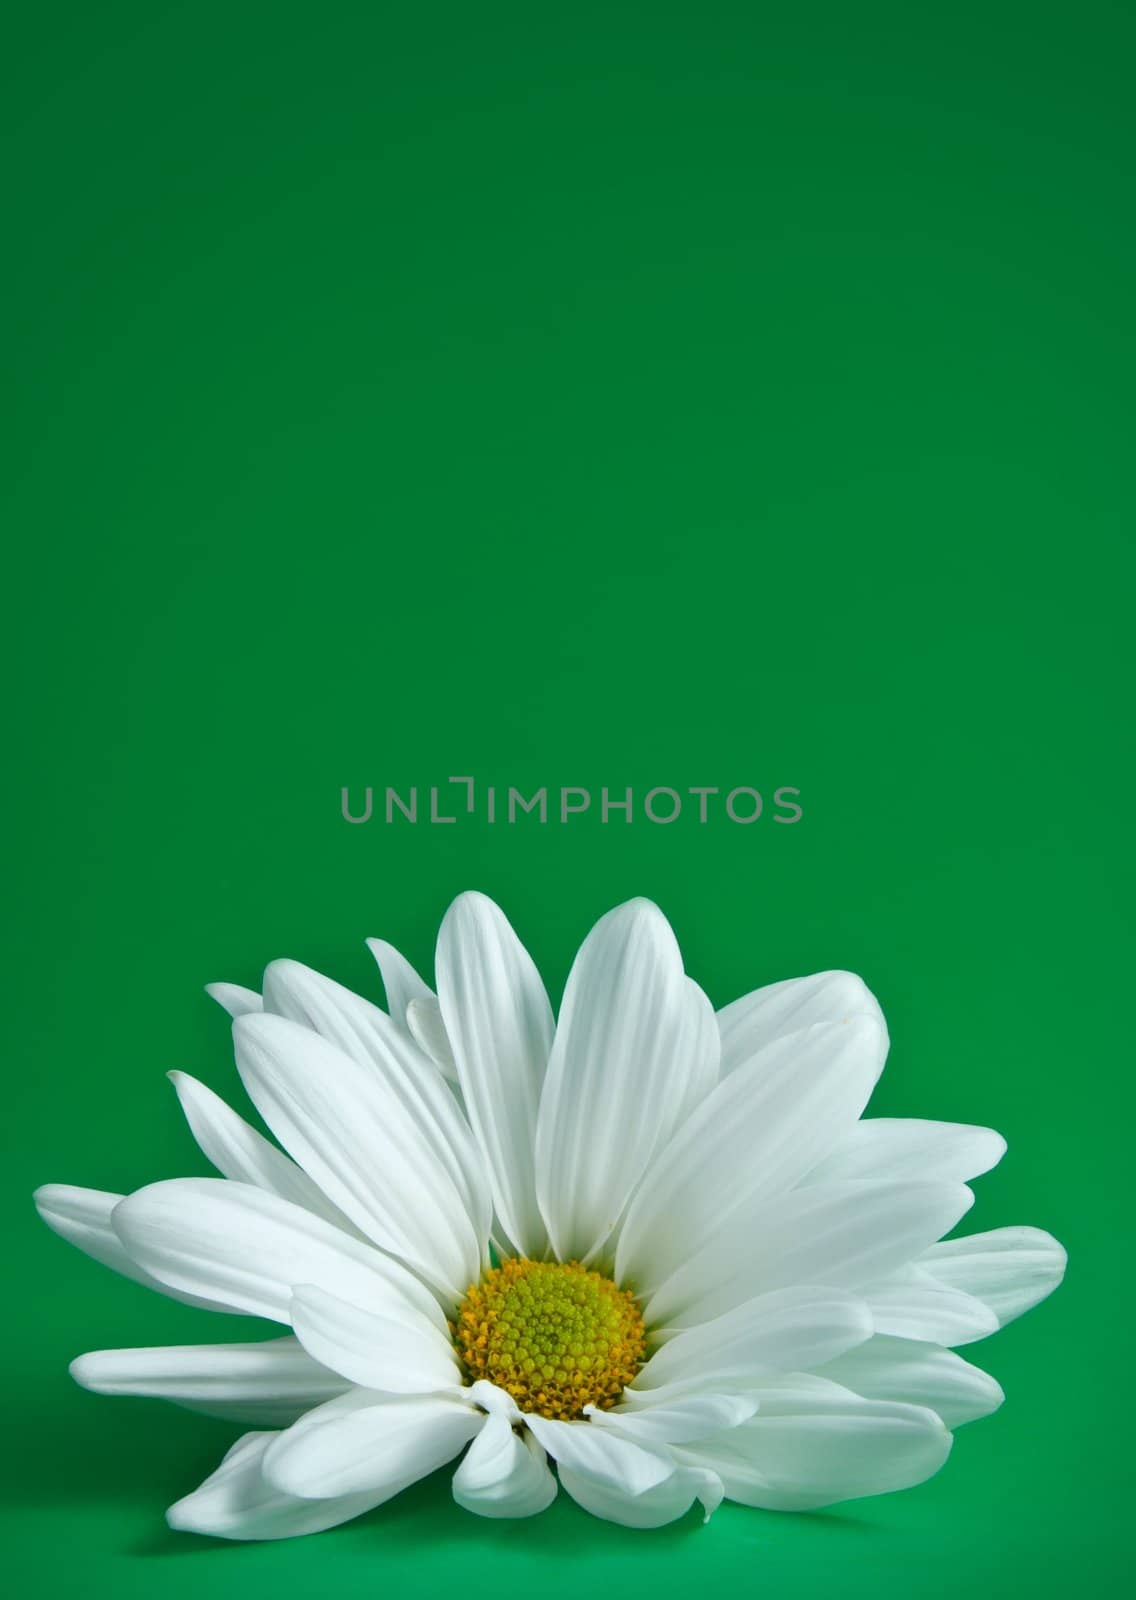 white daisy, green background by lanalanglois